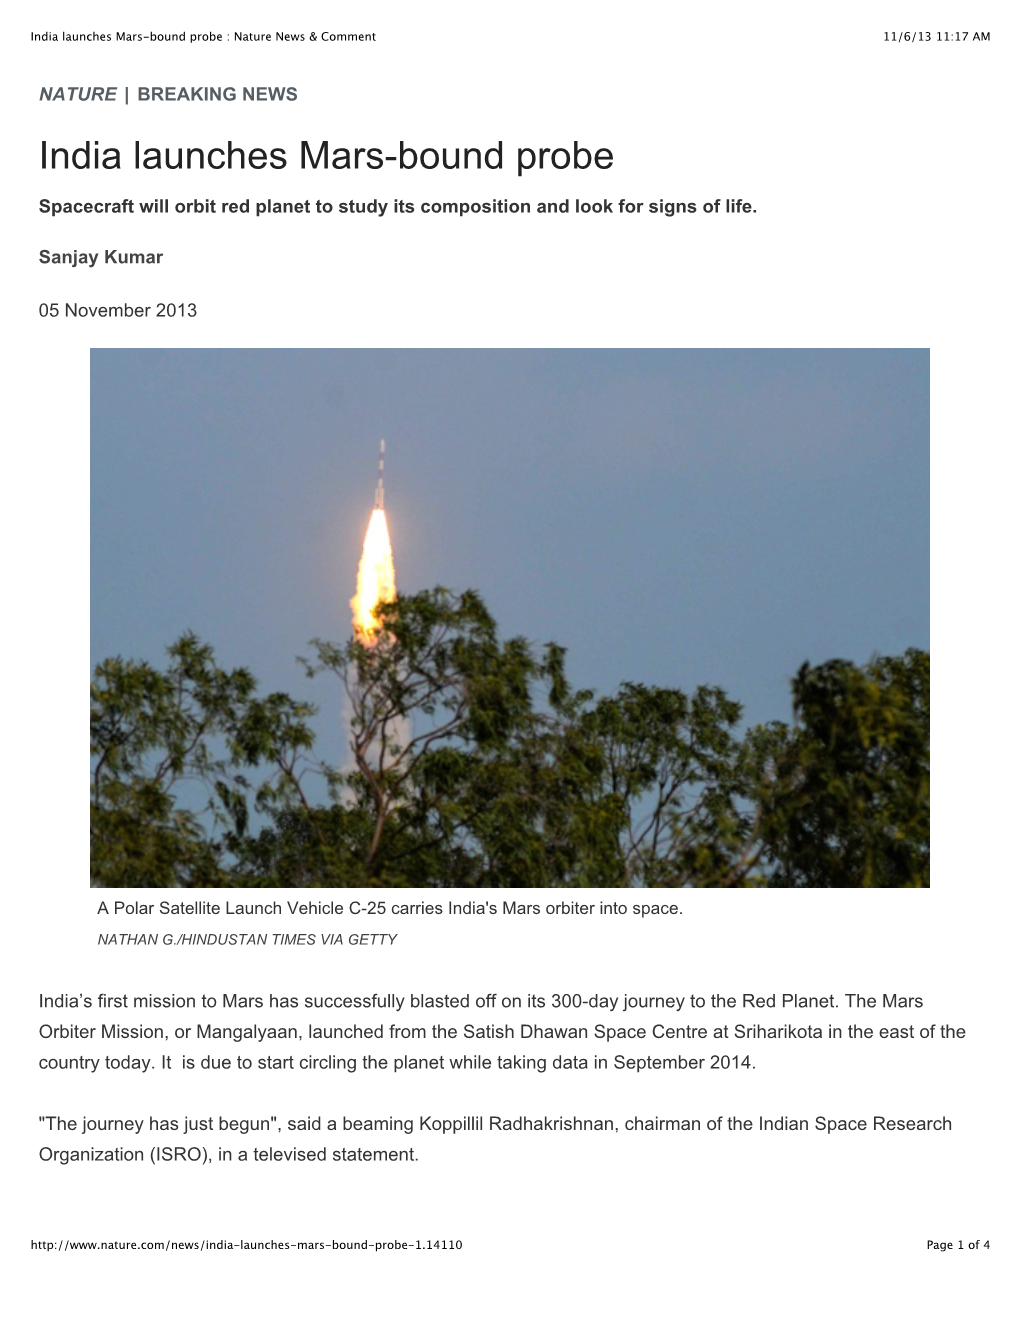 India Launches Mars-Bound Probe : Nature News & Comment 11/6/13 11:17 AM